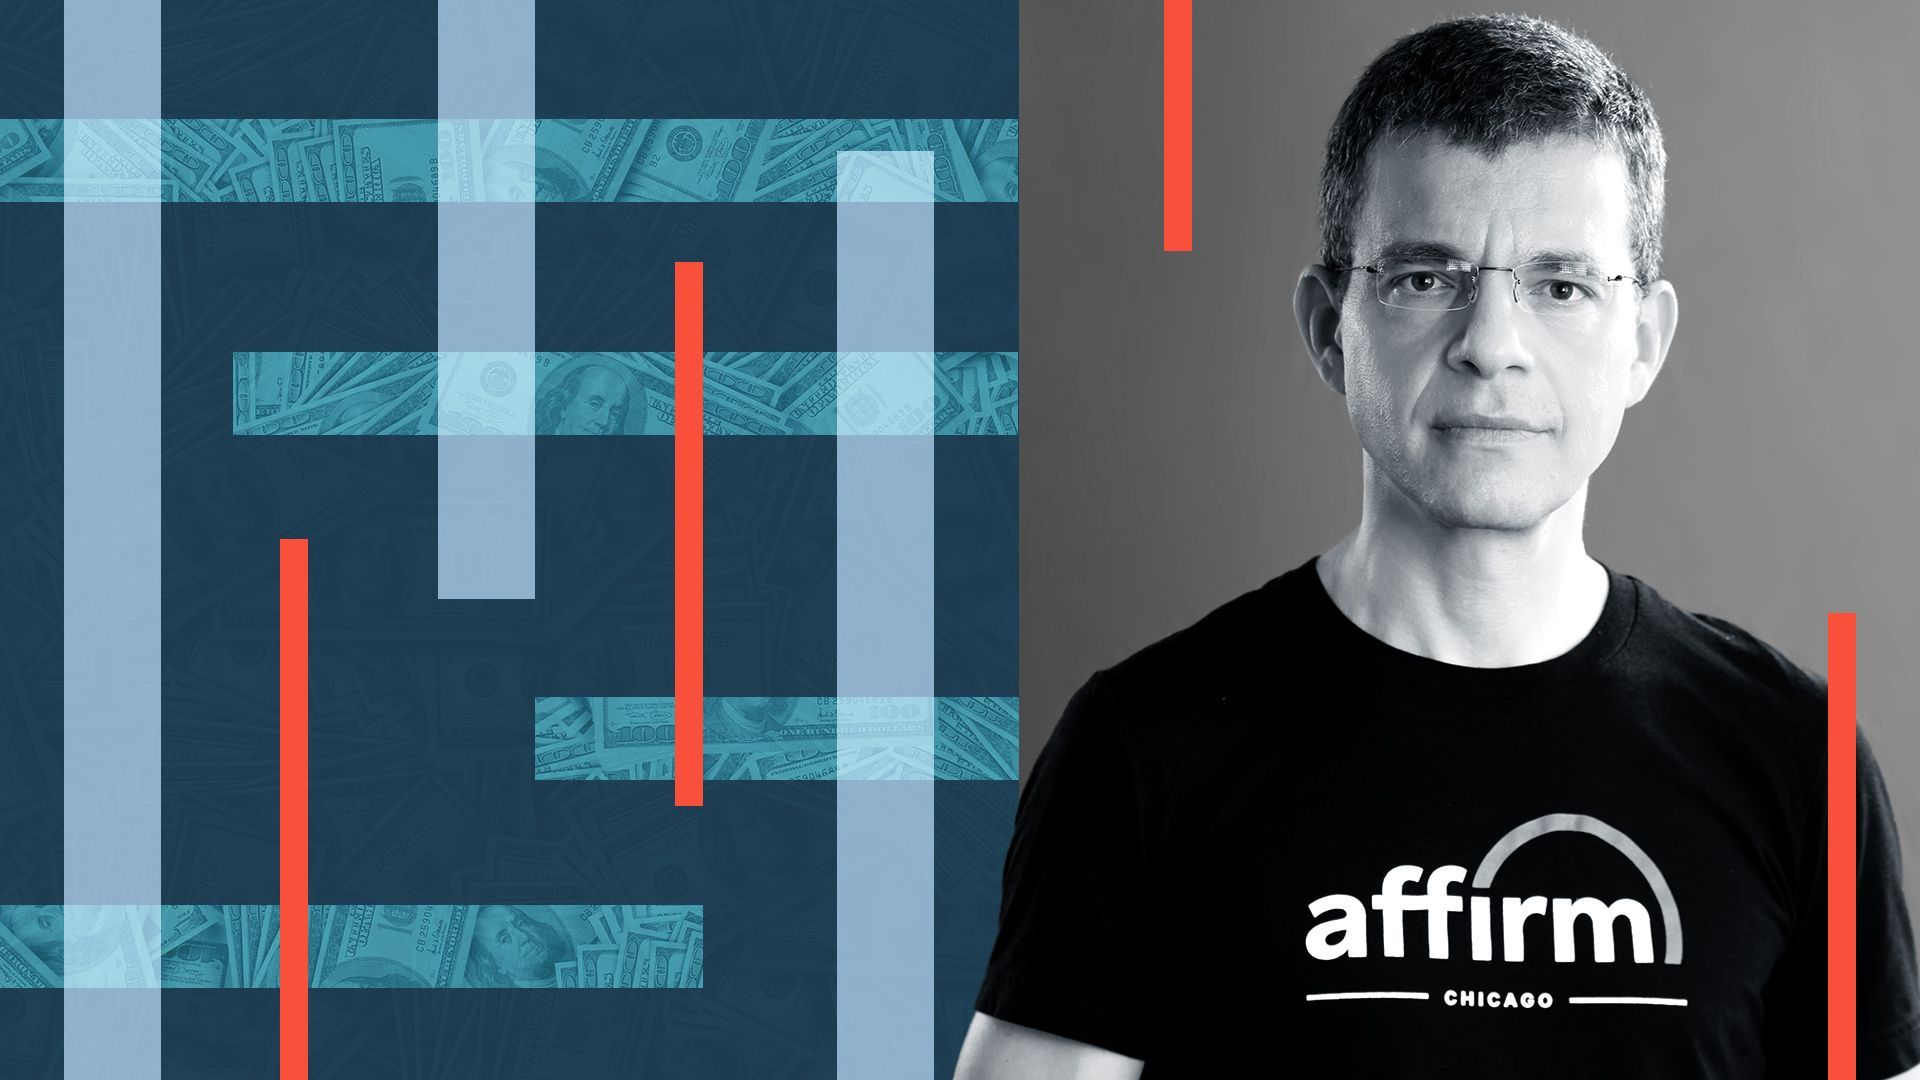 illustration of Affirm founder and CEO Max levchin surrounded by rectangles and cutouts of money